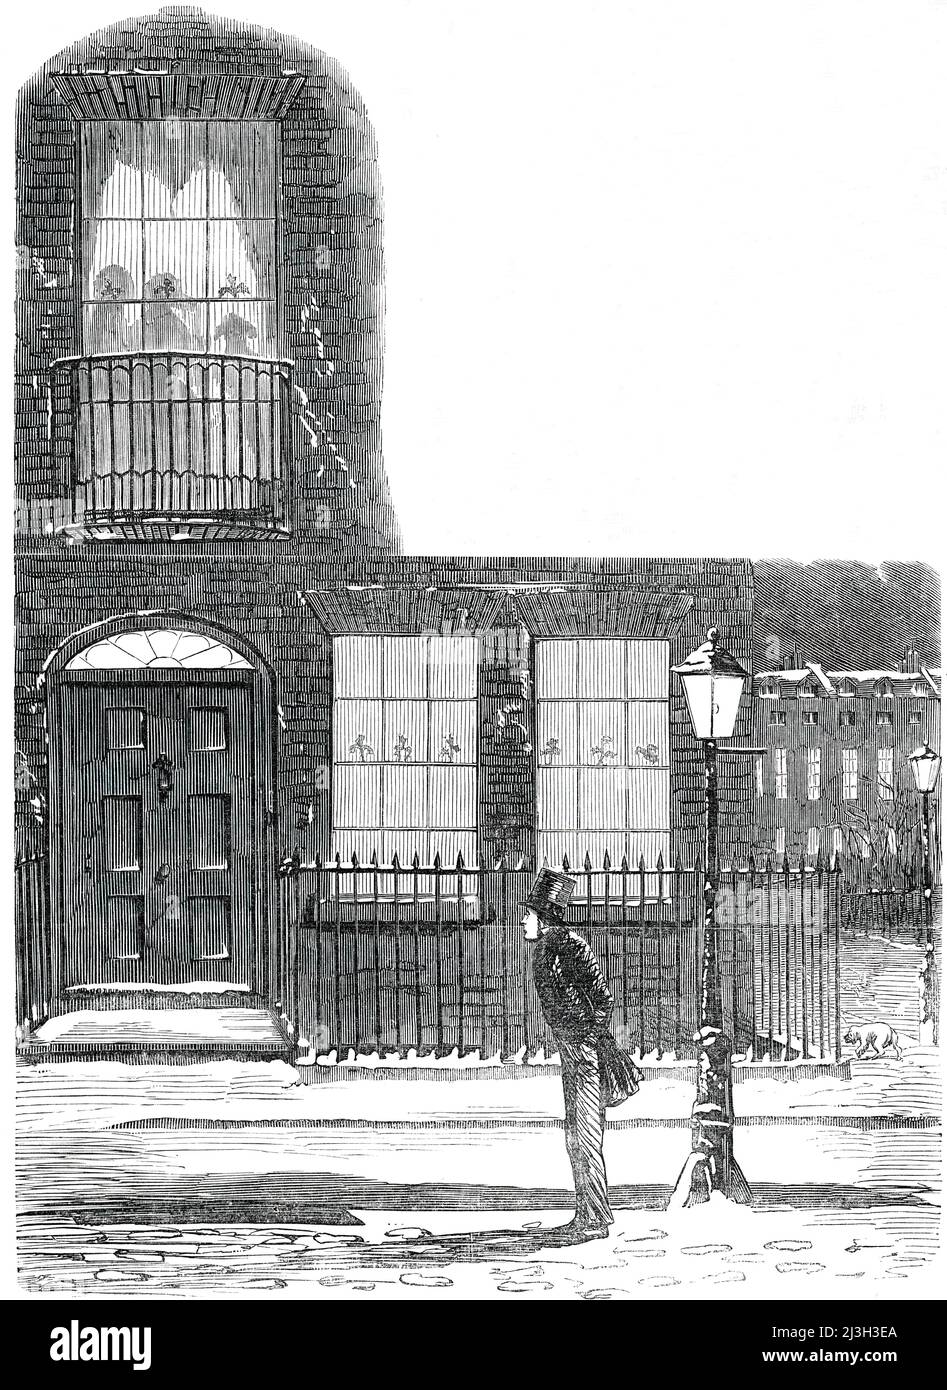 The Young Man Who is Alone, on Christmas Day - drawn by Leech, 1850. Illustration to &quot;Cold out of Doors, and Cold In-Doors, or, Tom Smithers's Christmas Day&quot;. 'Tom Smithers was a member of the Honourable Society of the Middle Temple...but on Christmas Day, 184-, Tom found himself with no invitation to dinner...on his way back to Chambers, he casts up a disconsolate glance at the house. Can it be? There is light in the kitchen - there is light in the drawingroom! Huzza! &quot;They are at home !&quot; And he knew them of old - the best people alive; and their house he knows for a house Stock Photo